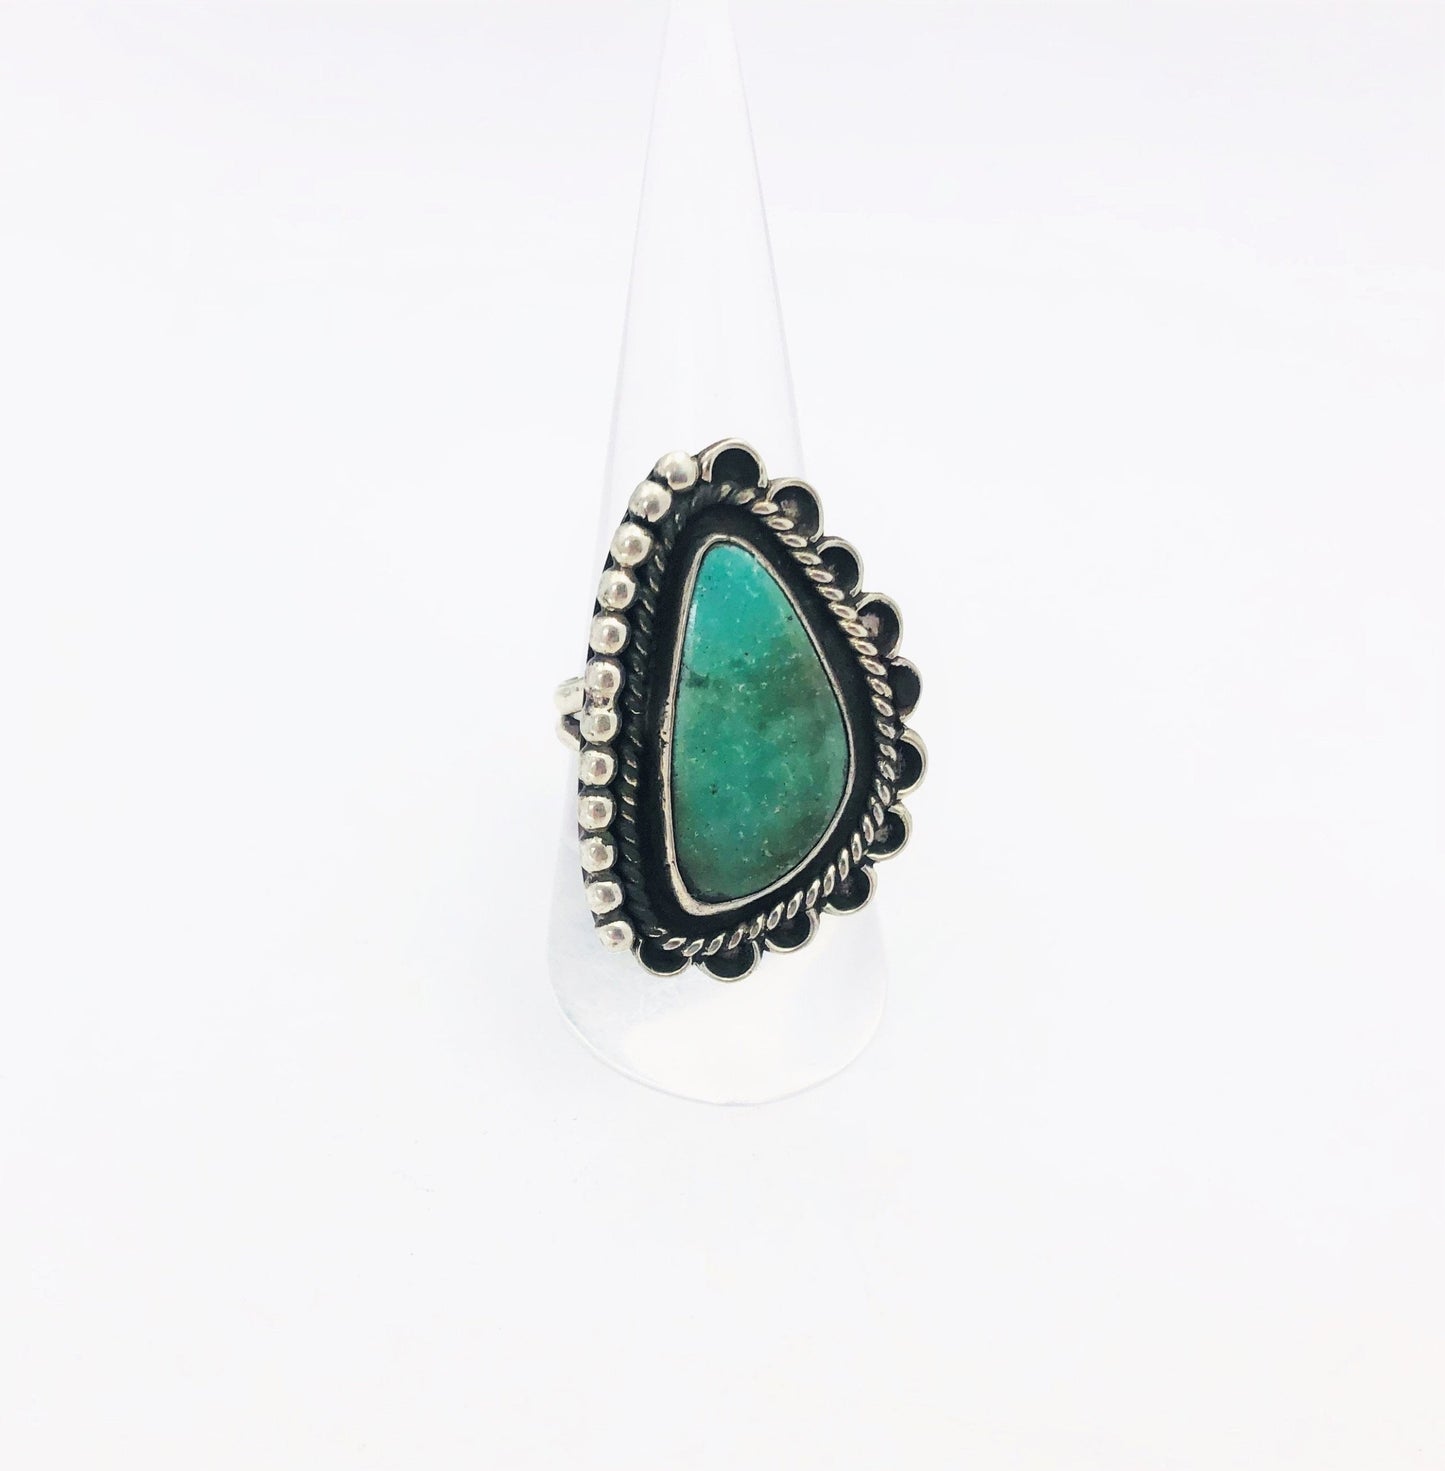 Vintage Southwestern Silver And Turquoise Ring Size 8